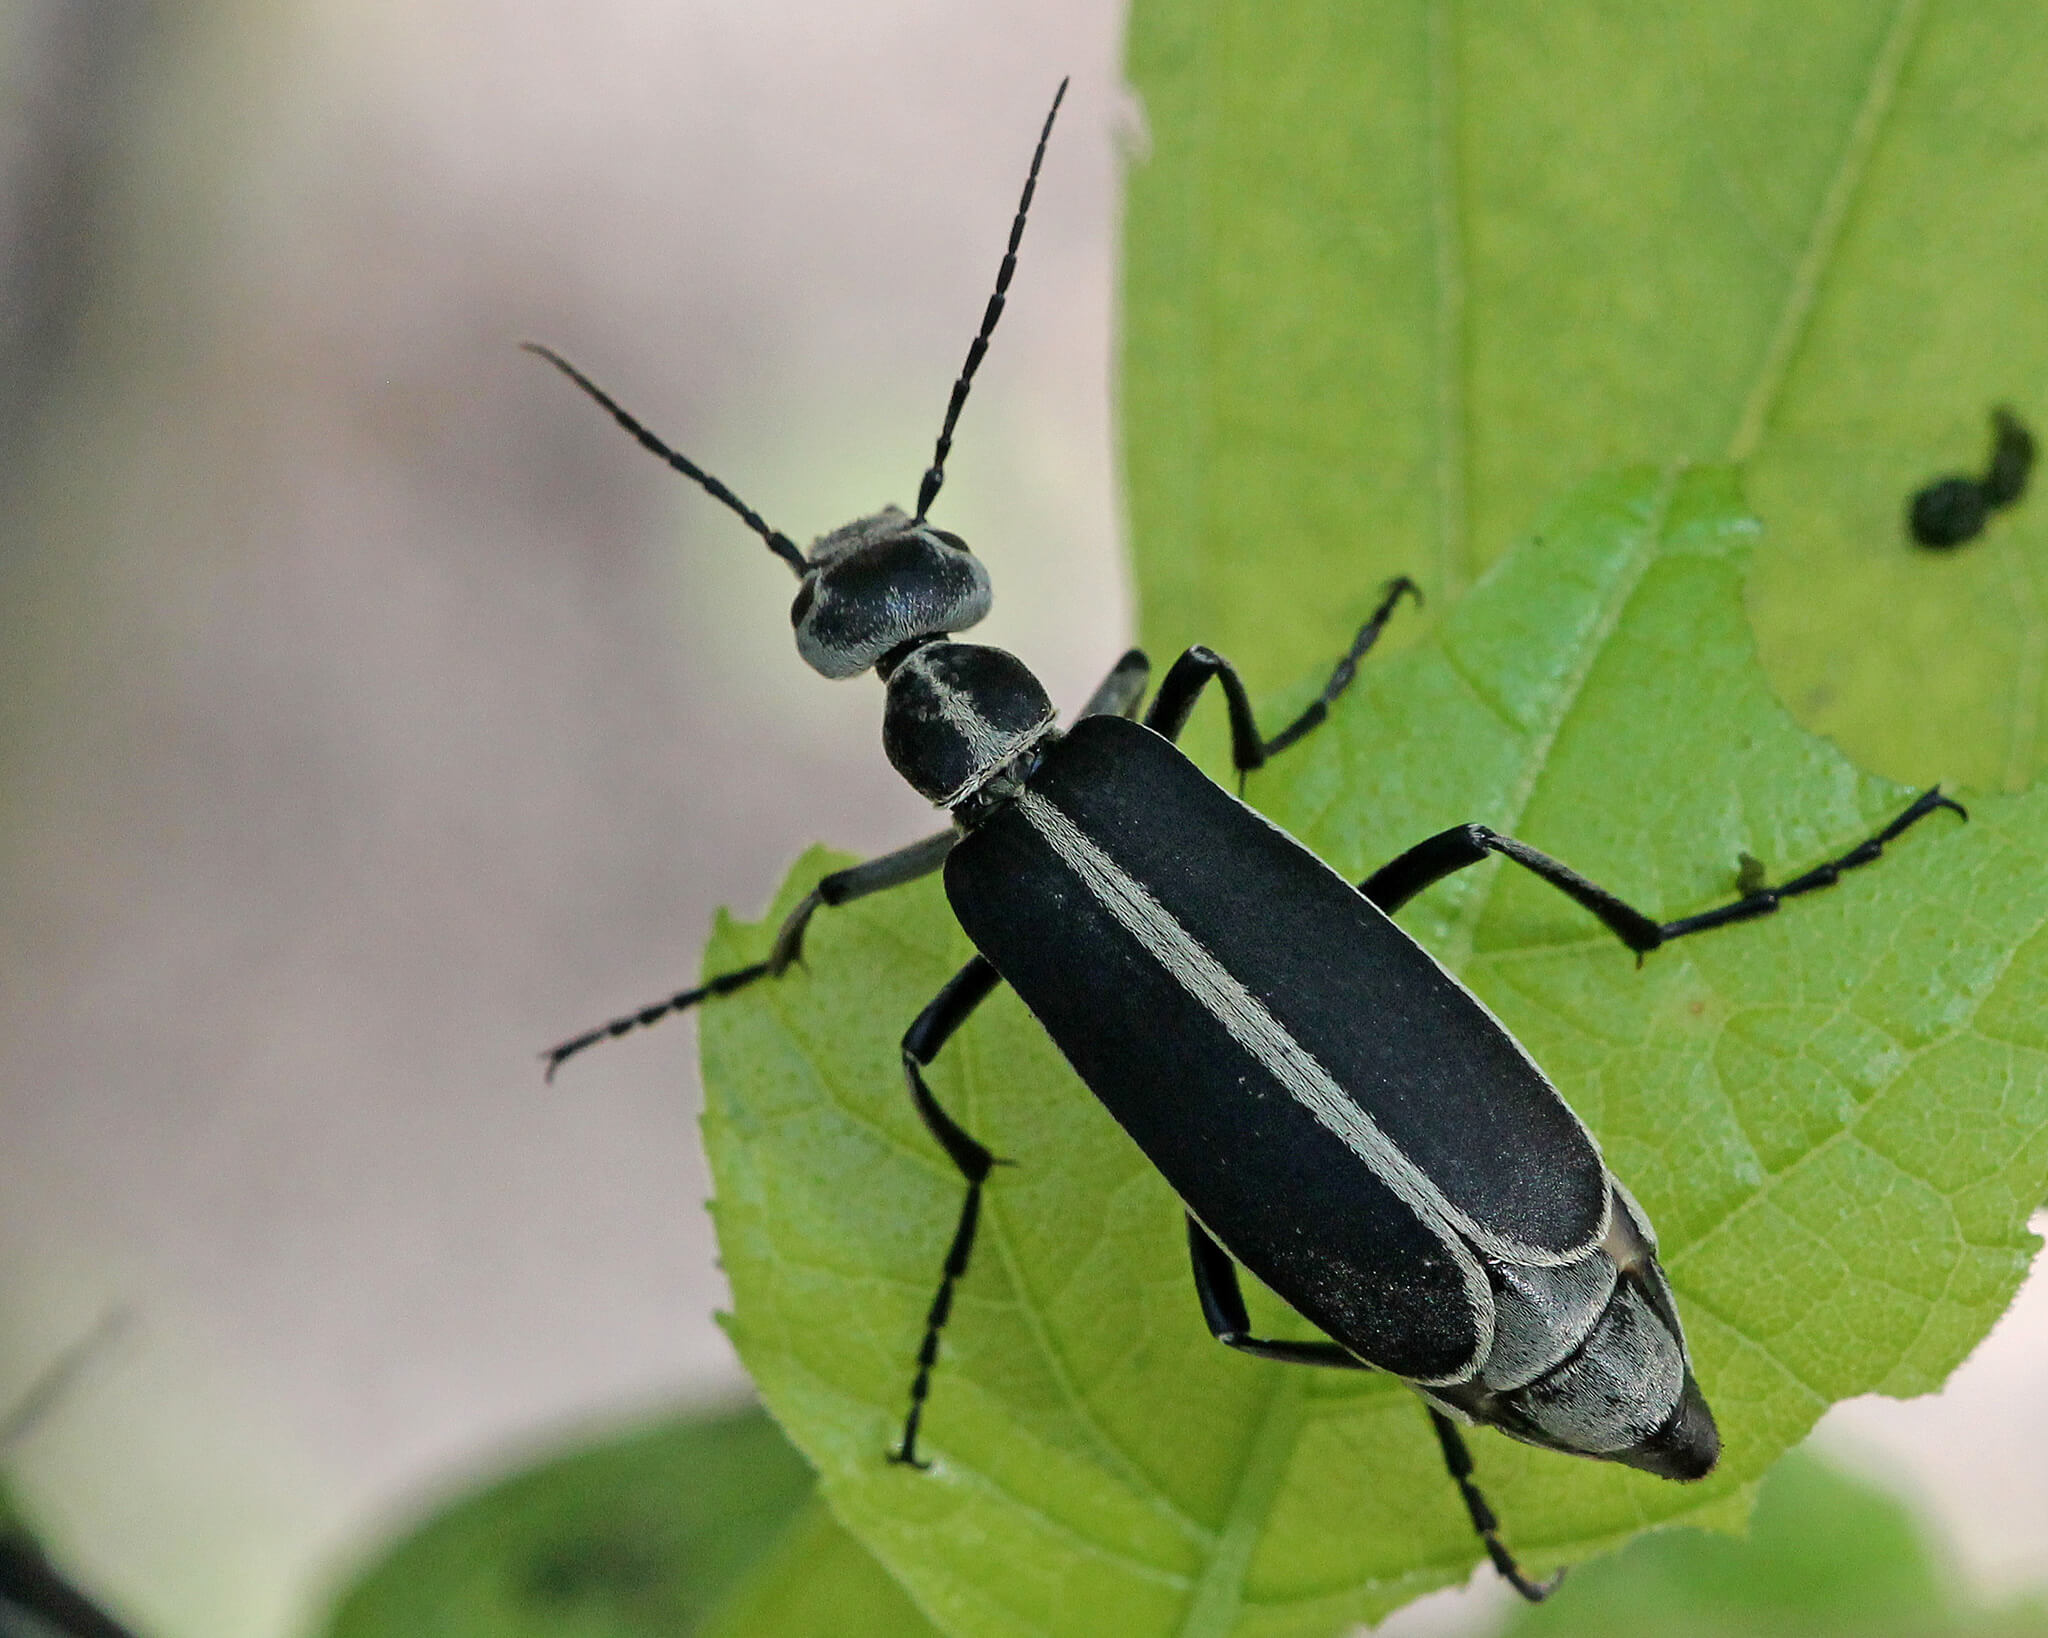 Margined blister beetle on a green leaf, with a black body and white outlined margins along wings on body.